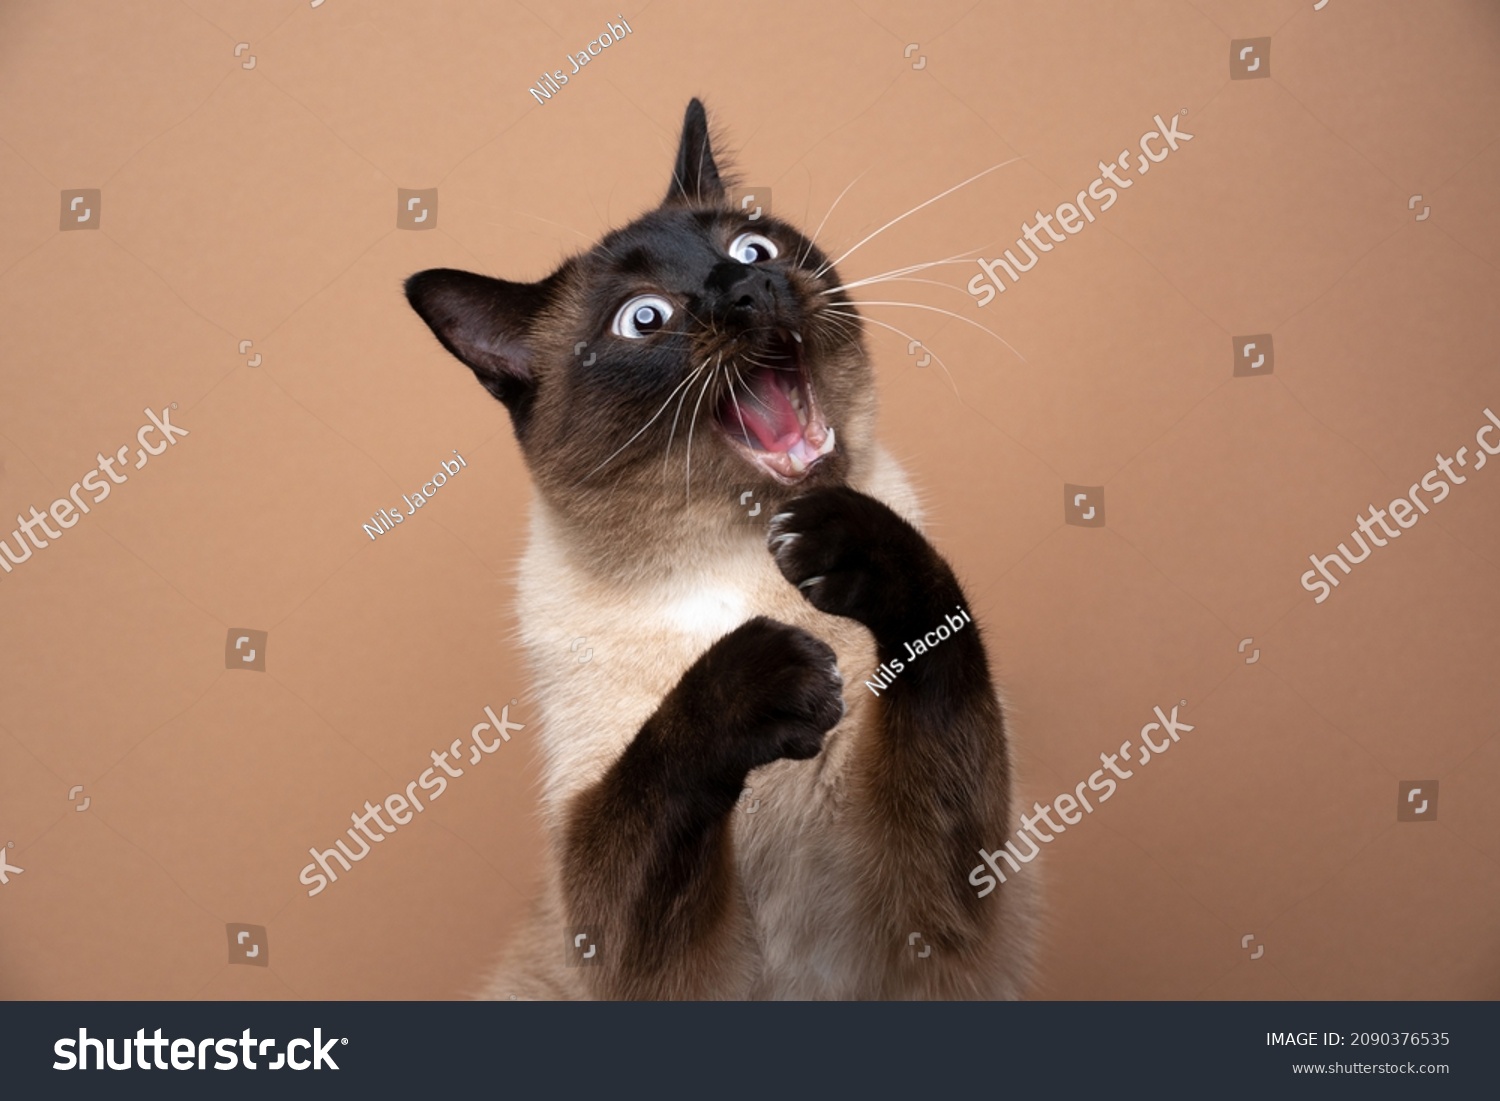 funny seal point siamese cat playing raising paws making funny face with mouth open on brown background with copy space #2090376535